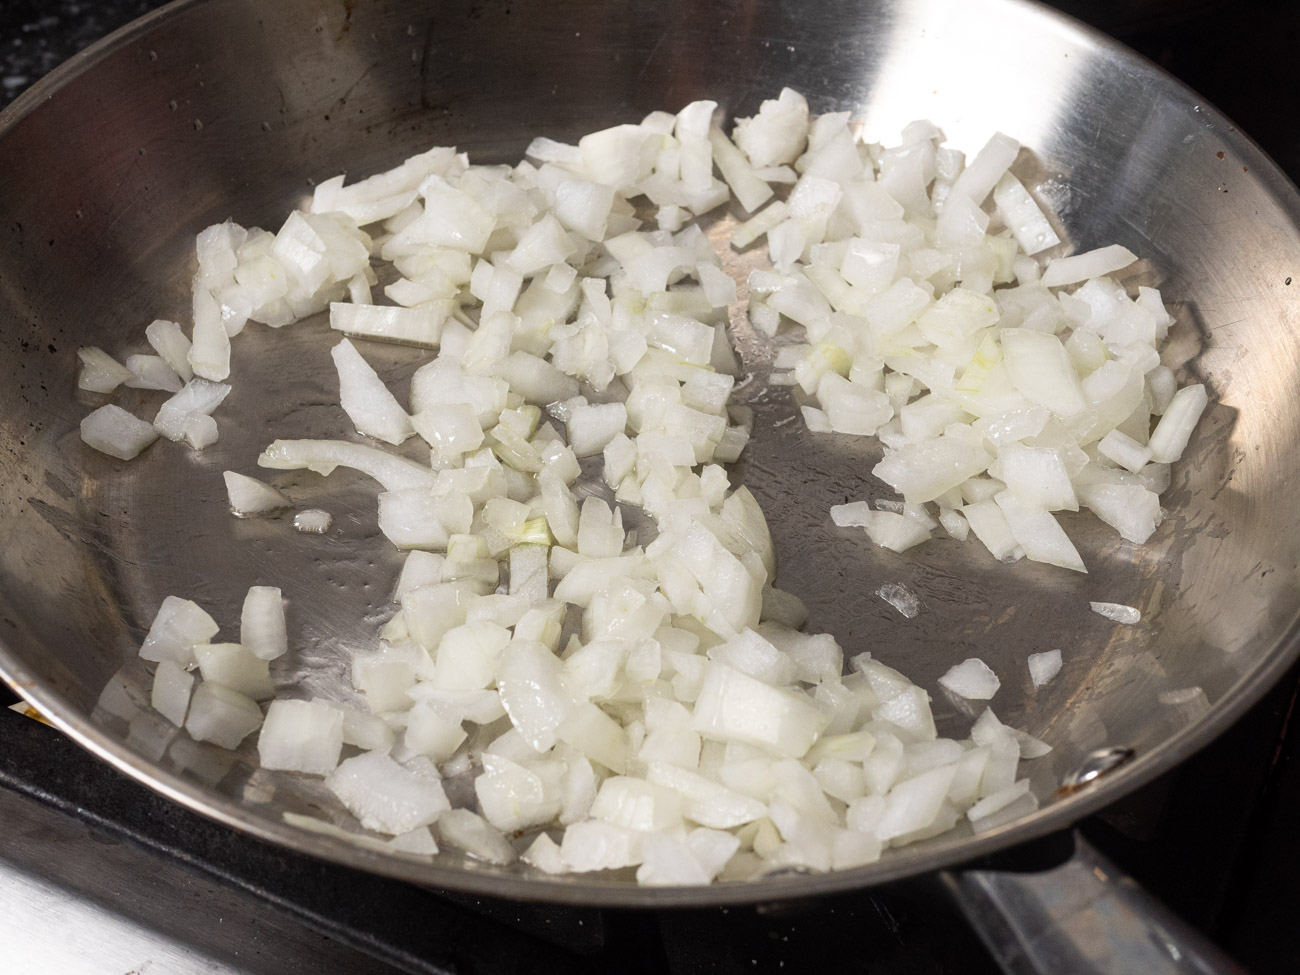 While the rice is cooking, add oil to a large skillet and sauté onion over medium heat until translucent (usually 2-4 minutes).